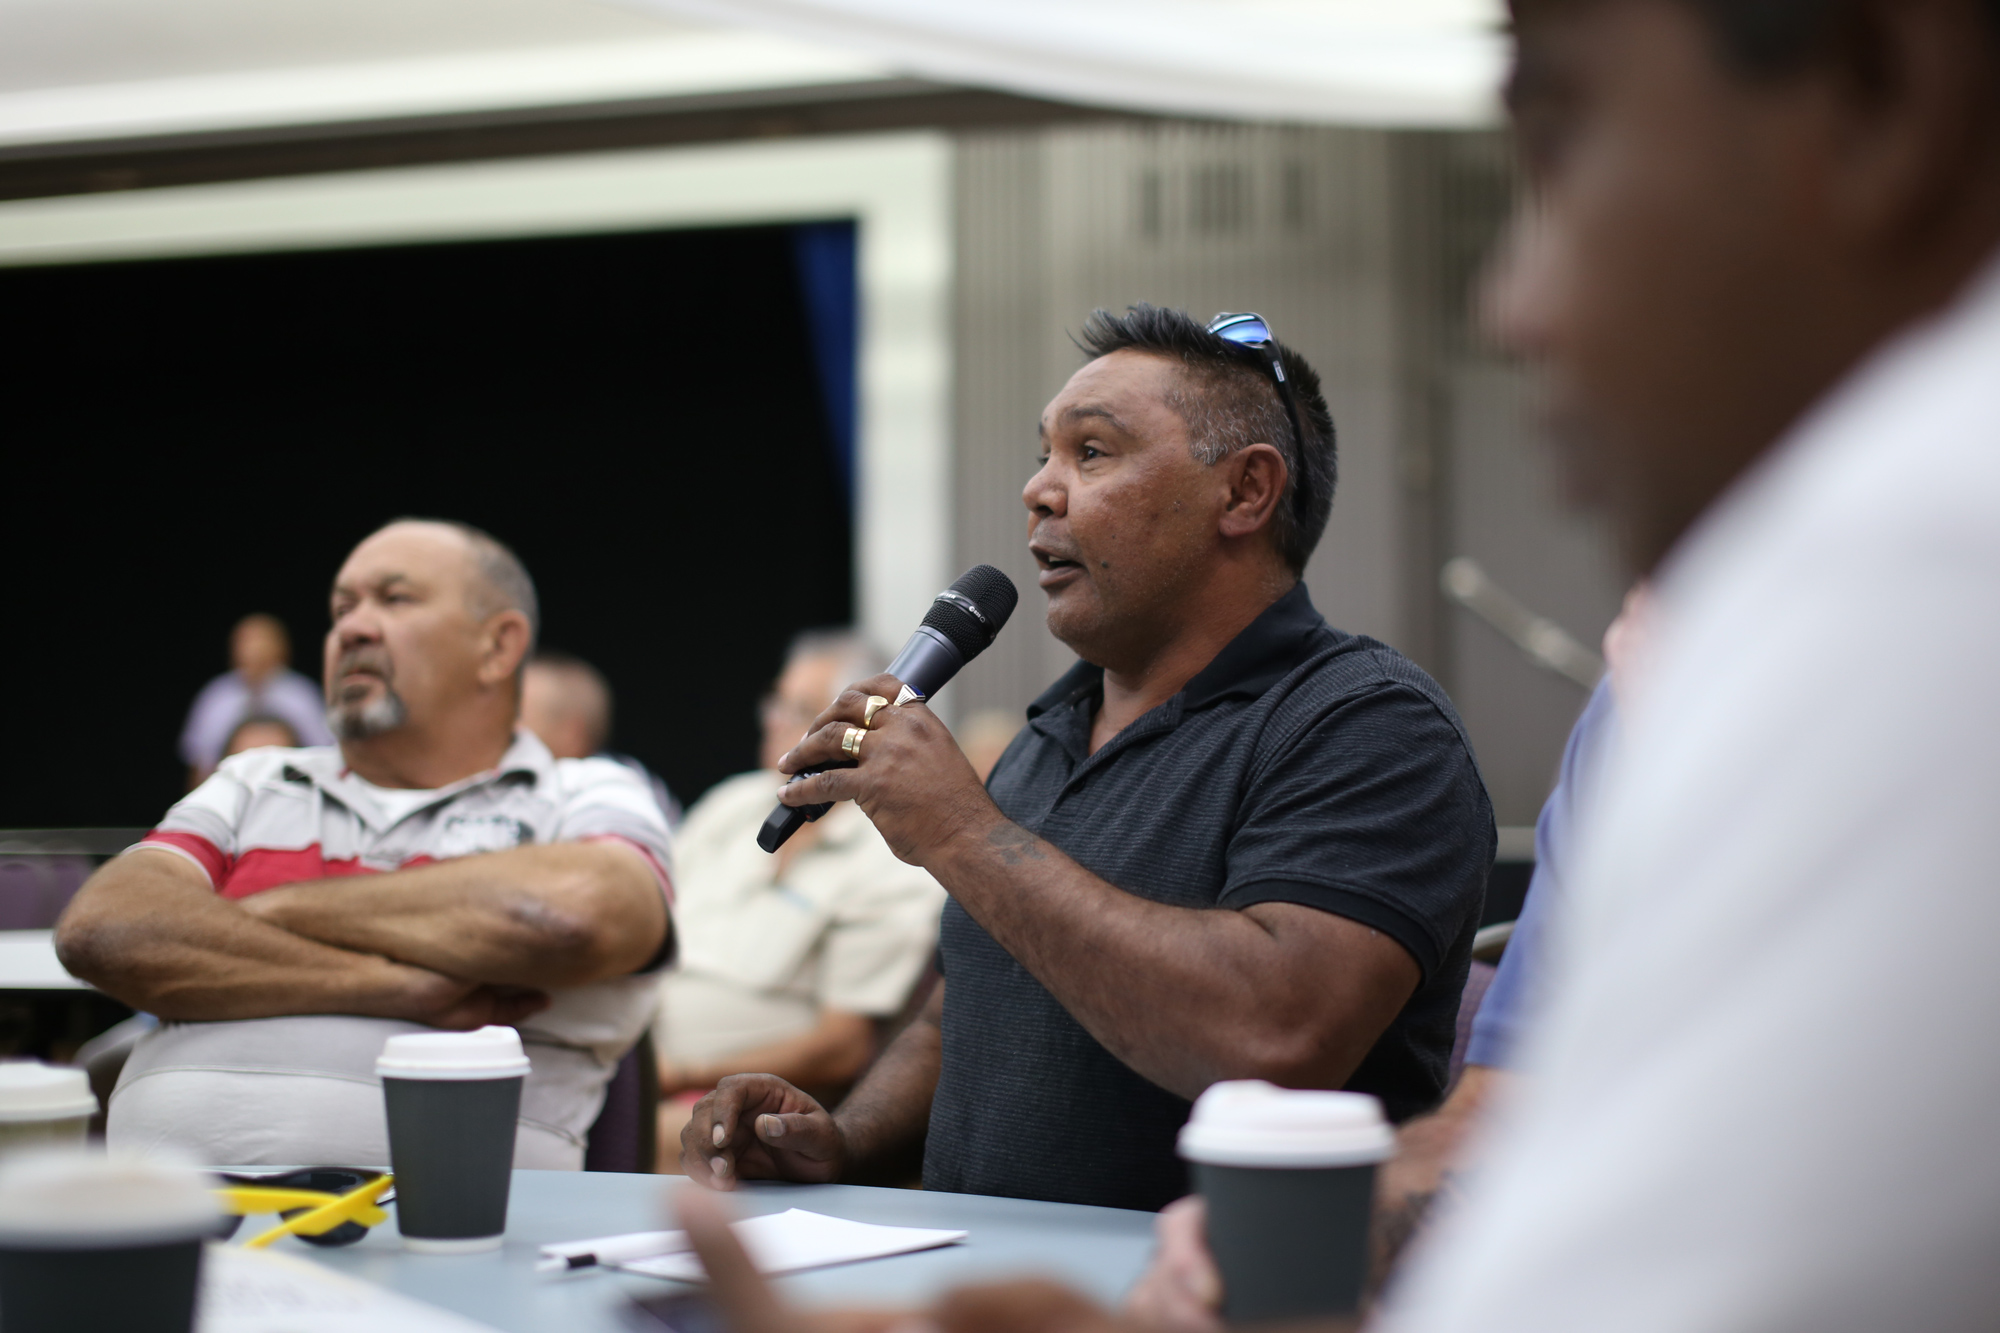 Man shares his view on constitutional recognition at the Dubbo regional dialogue